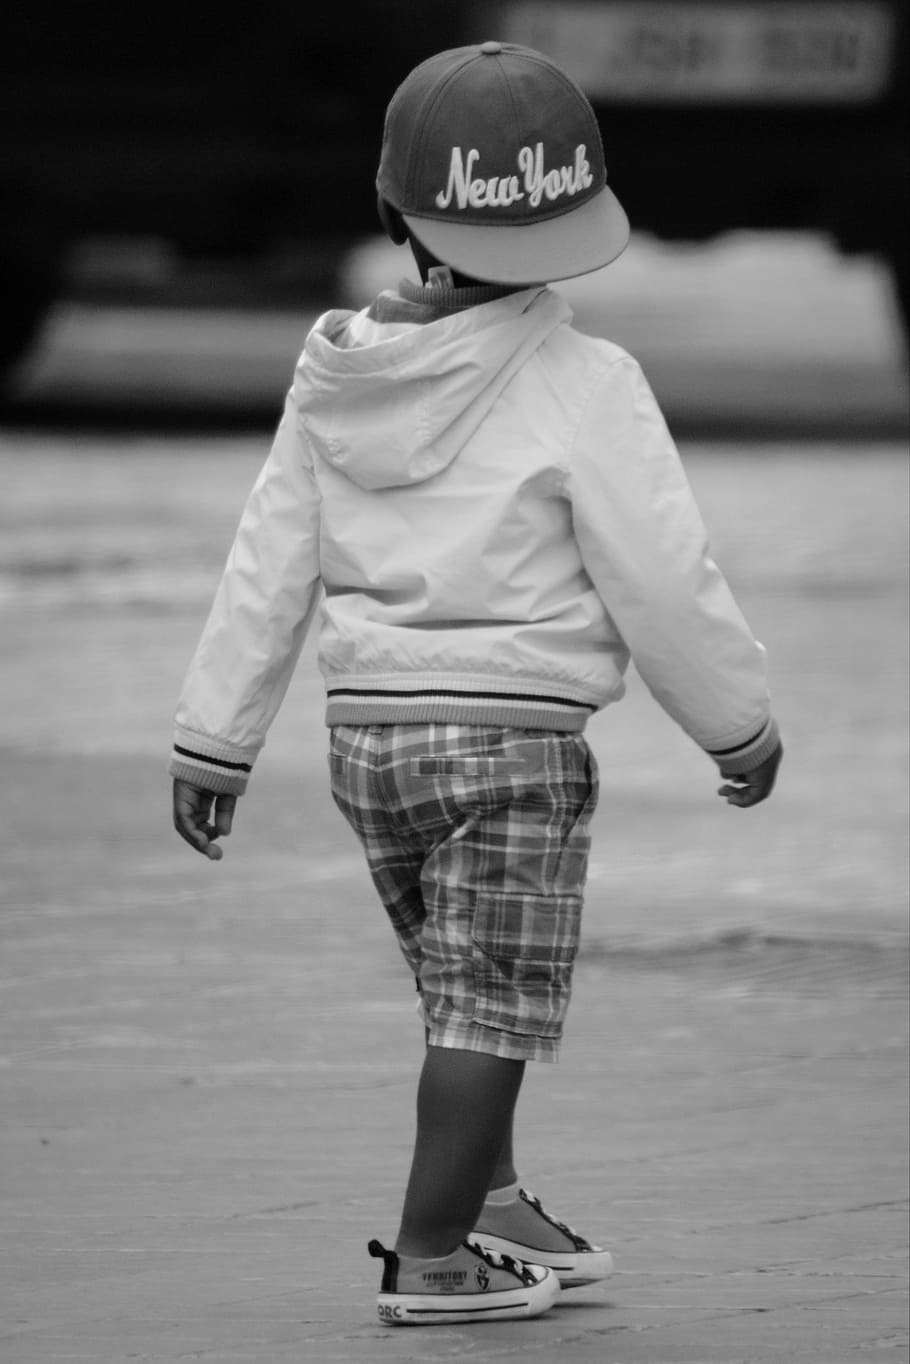 Child, People, Pet, Clothing, boy, full length, casual clothing, hat, one person, rear view